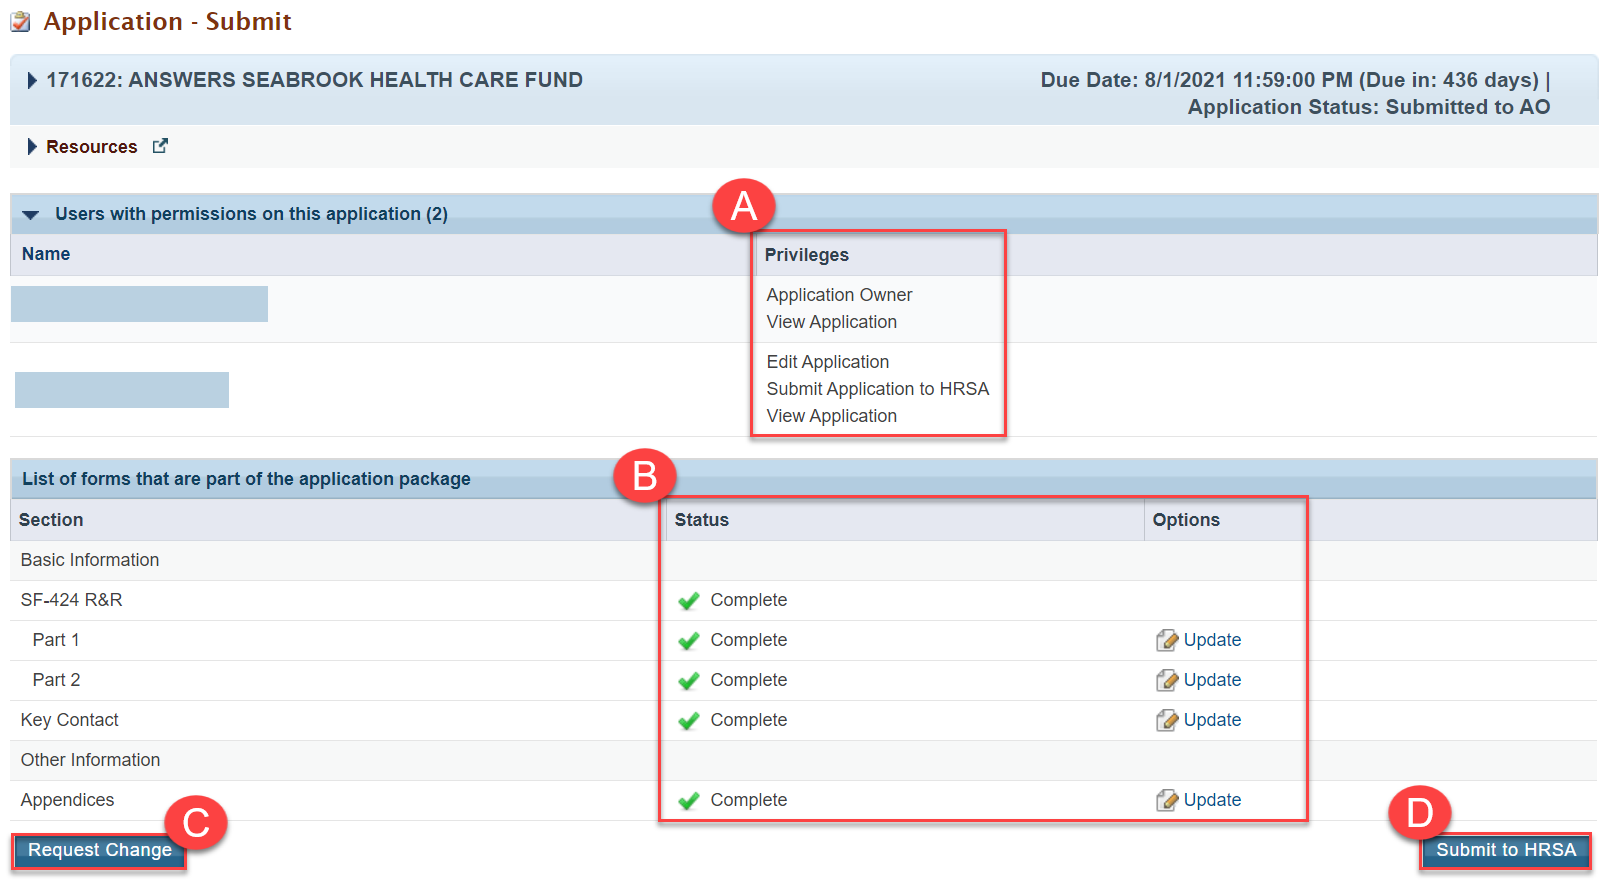 Screenshot of the Application - Submit page for for AOs to request change or submit to HRSA